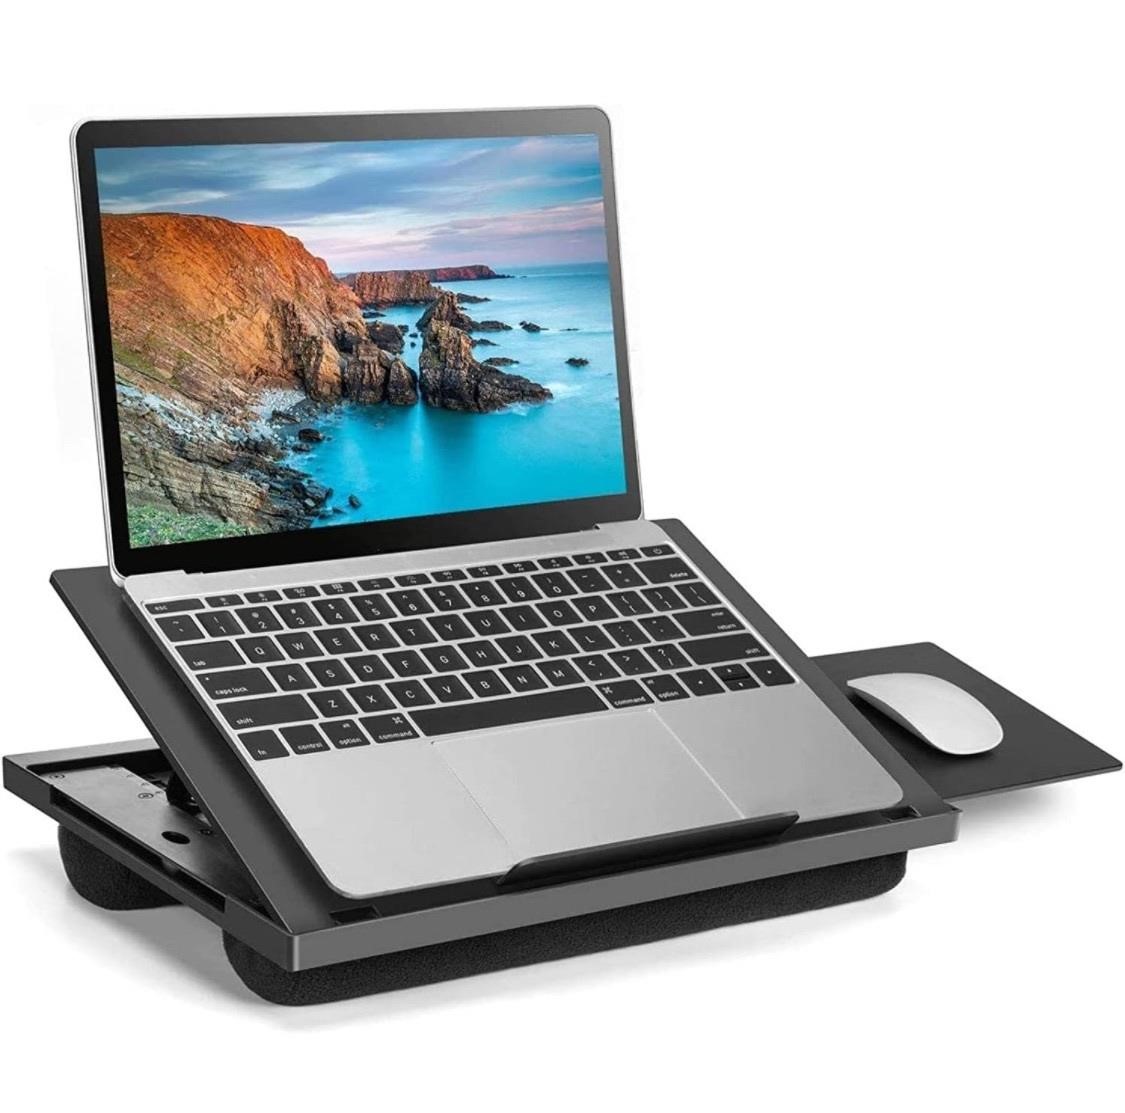 Adjustable Lap Desk - with 6 Adjustable Angles